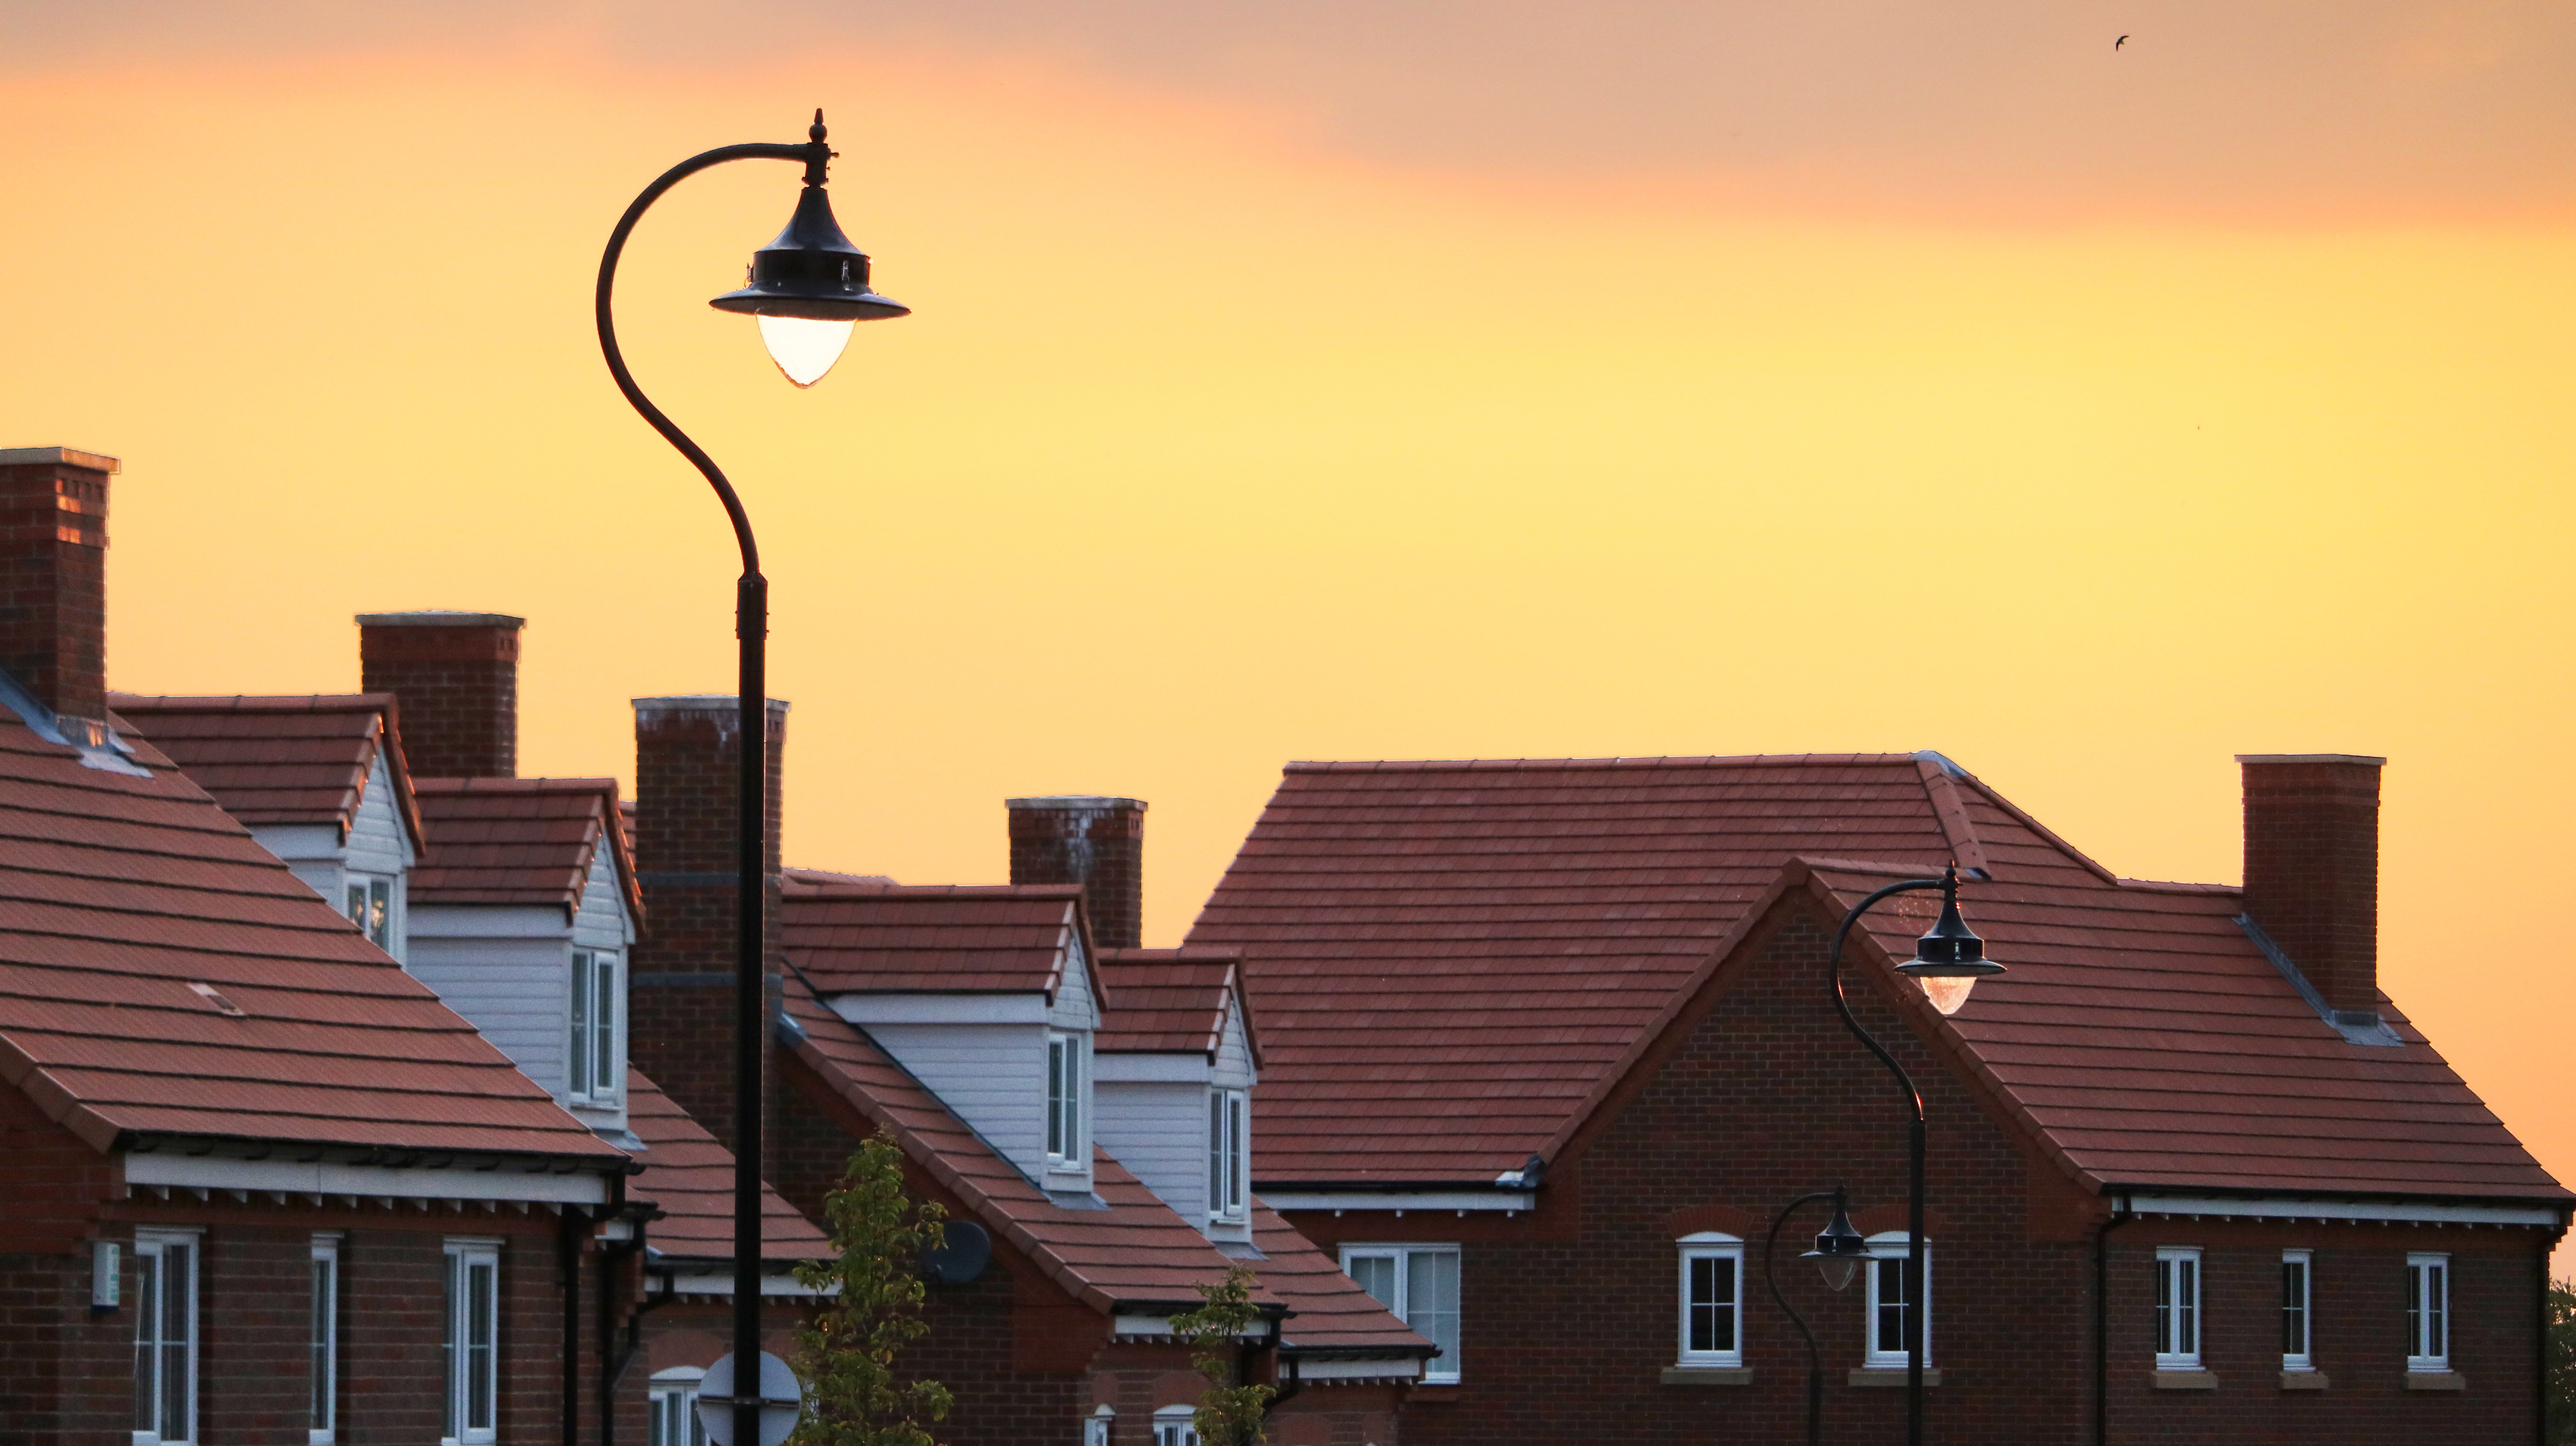 A sunset over a typical English street